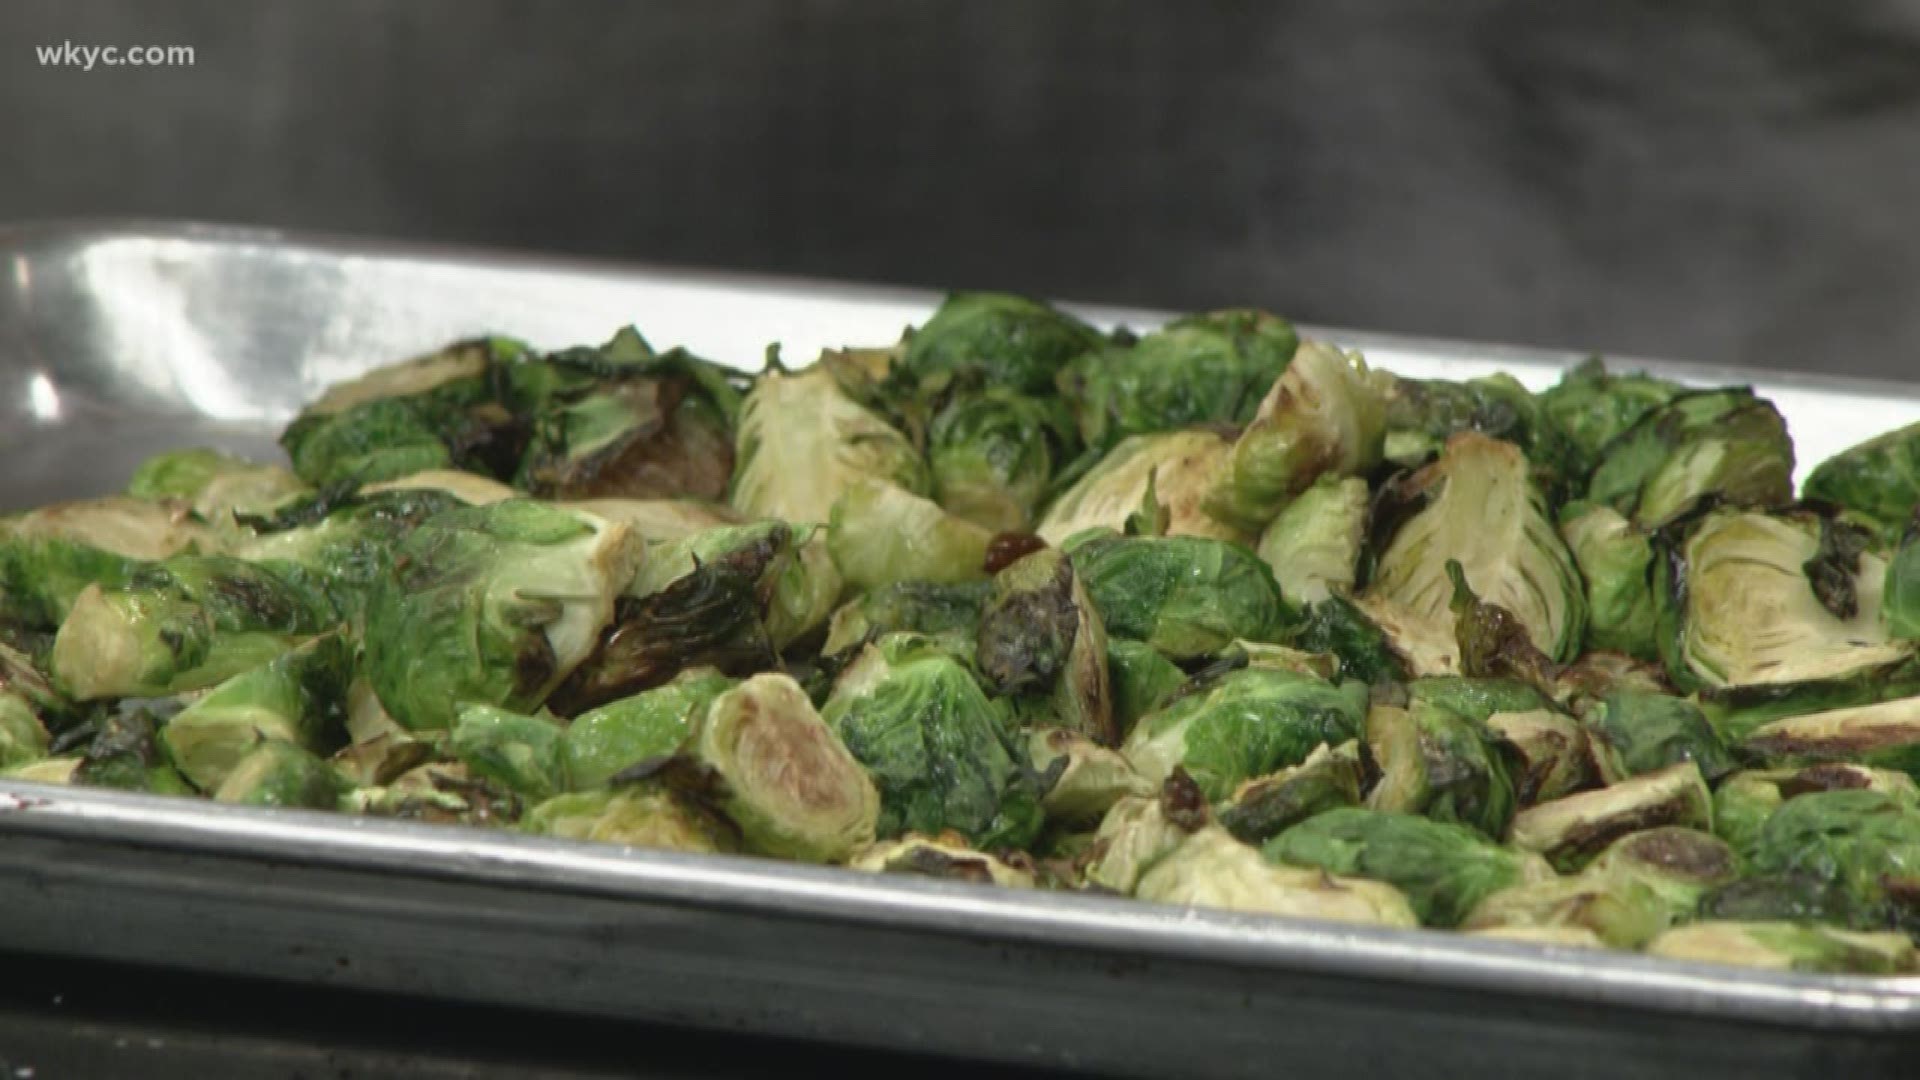 Here's how to make brussel sprouts a signature side dish for the holiday meals.